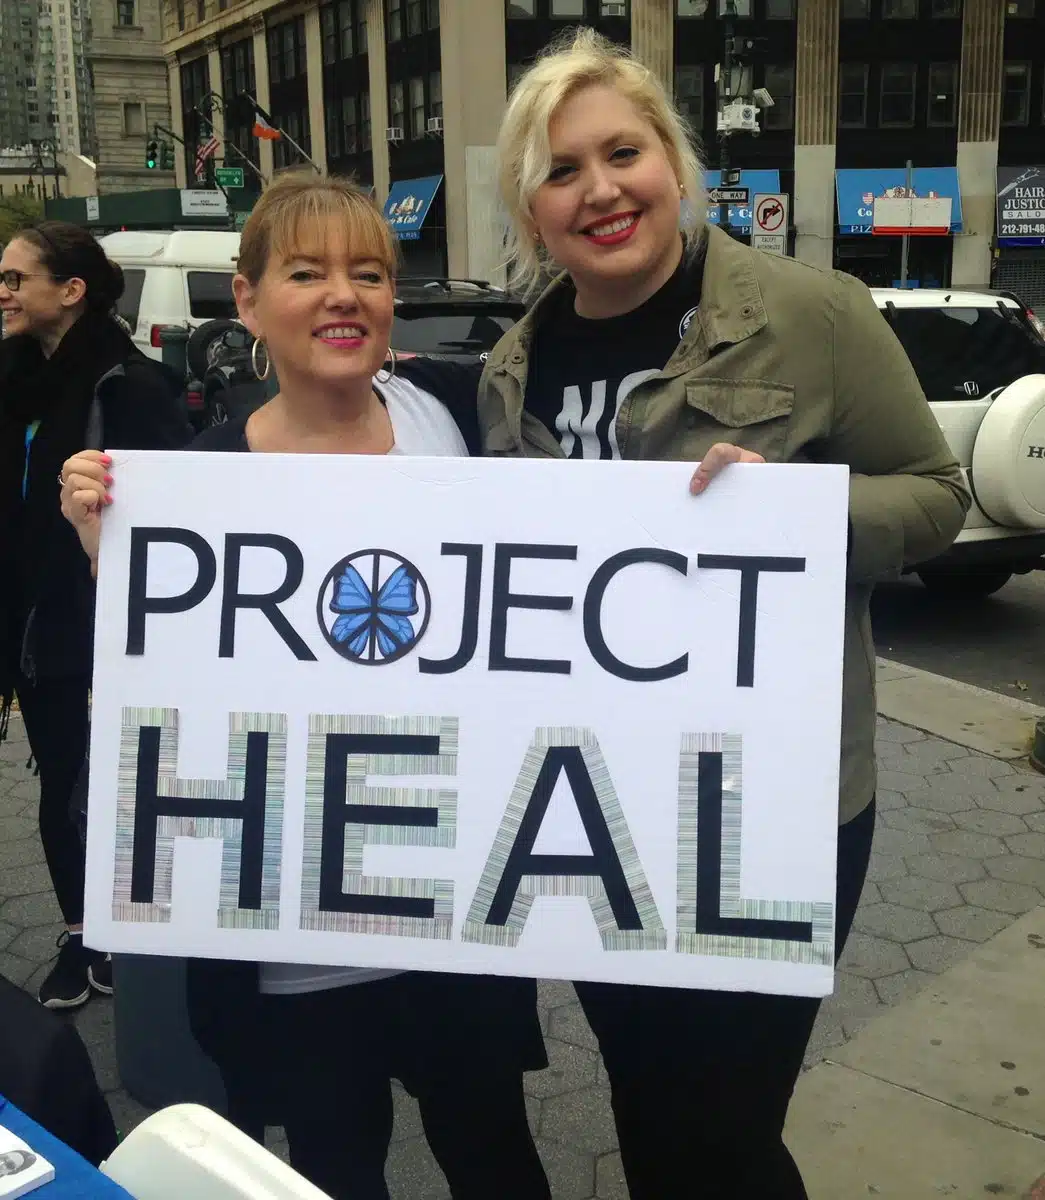 Going Camping with Project HEAL!